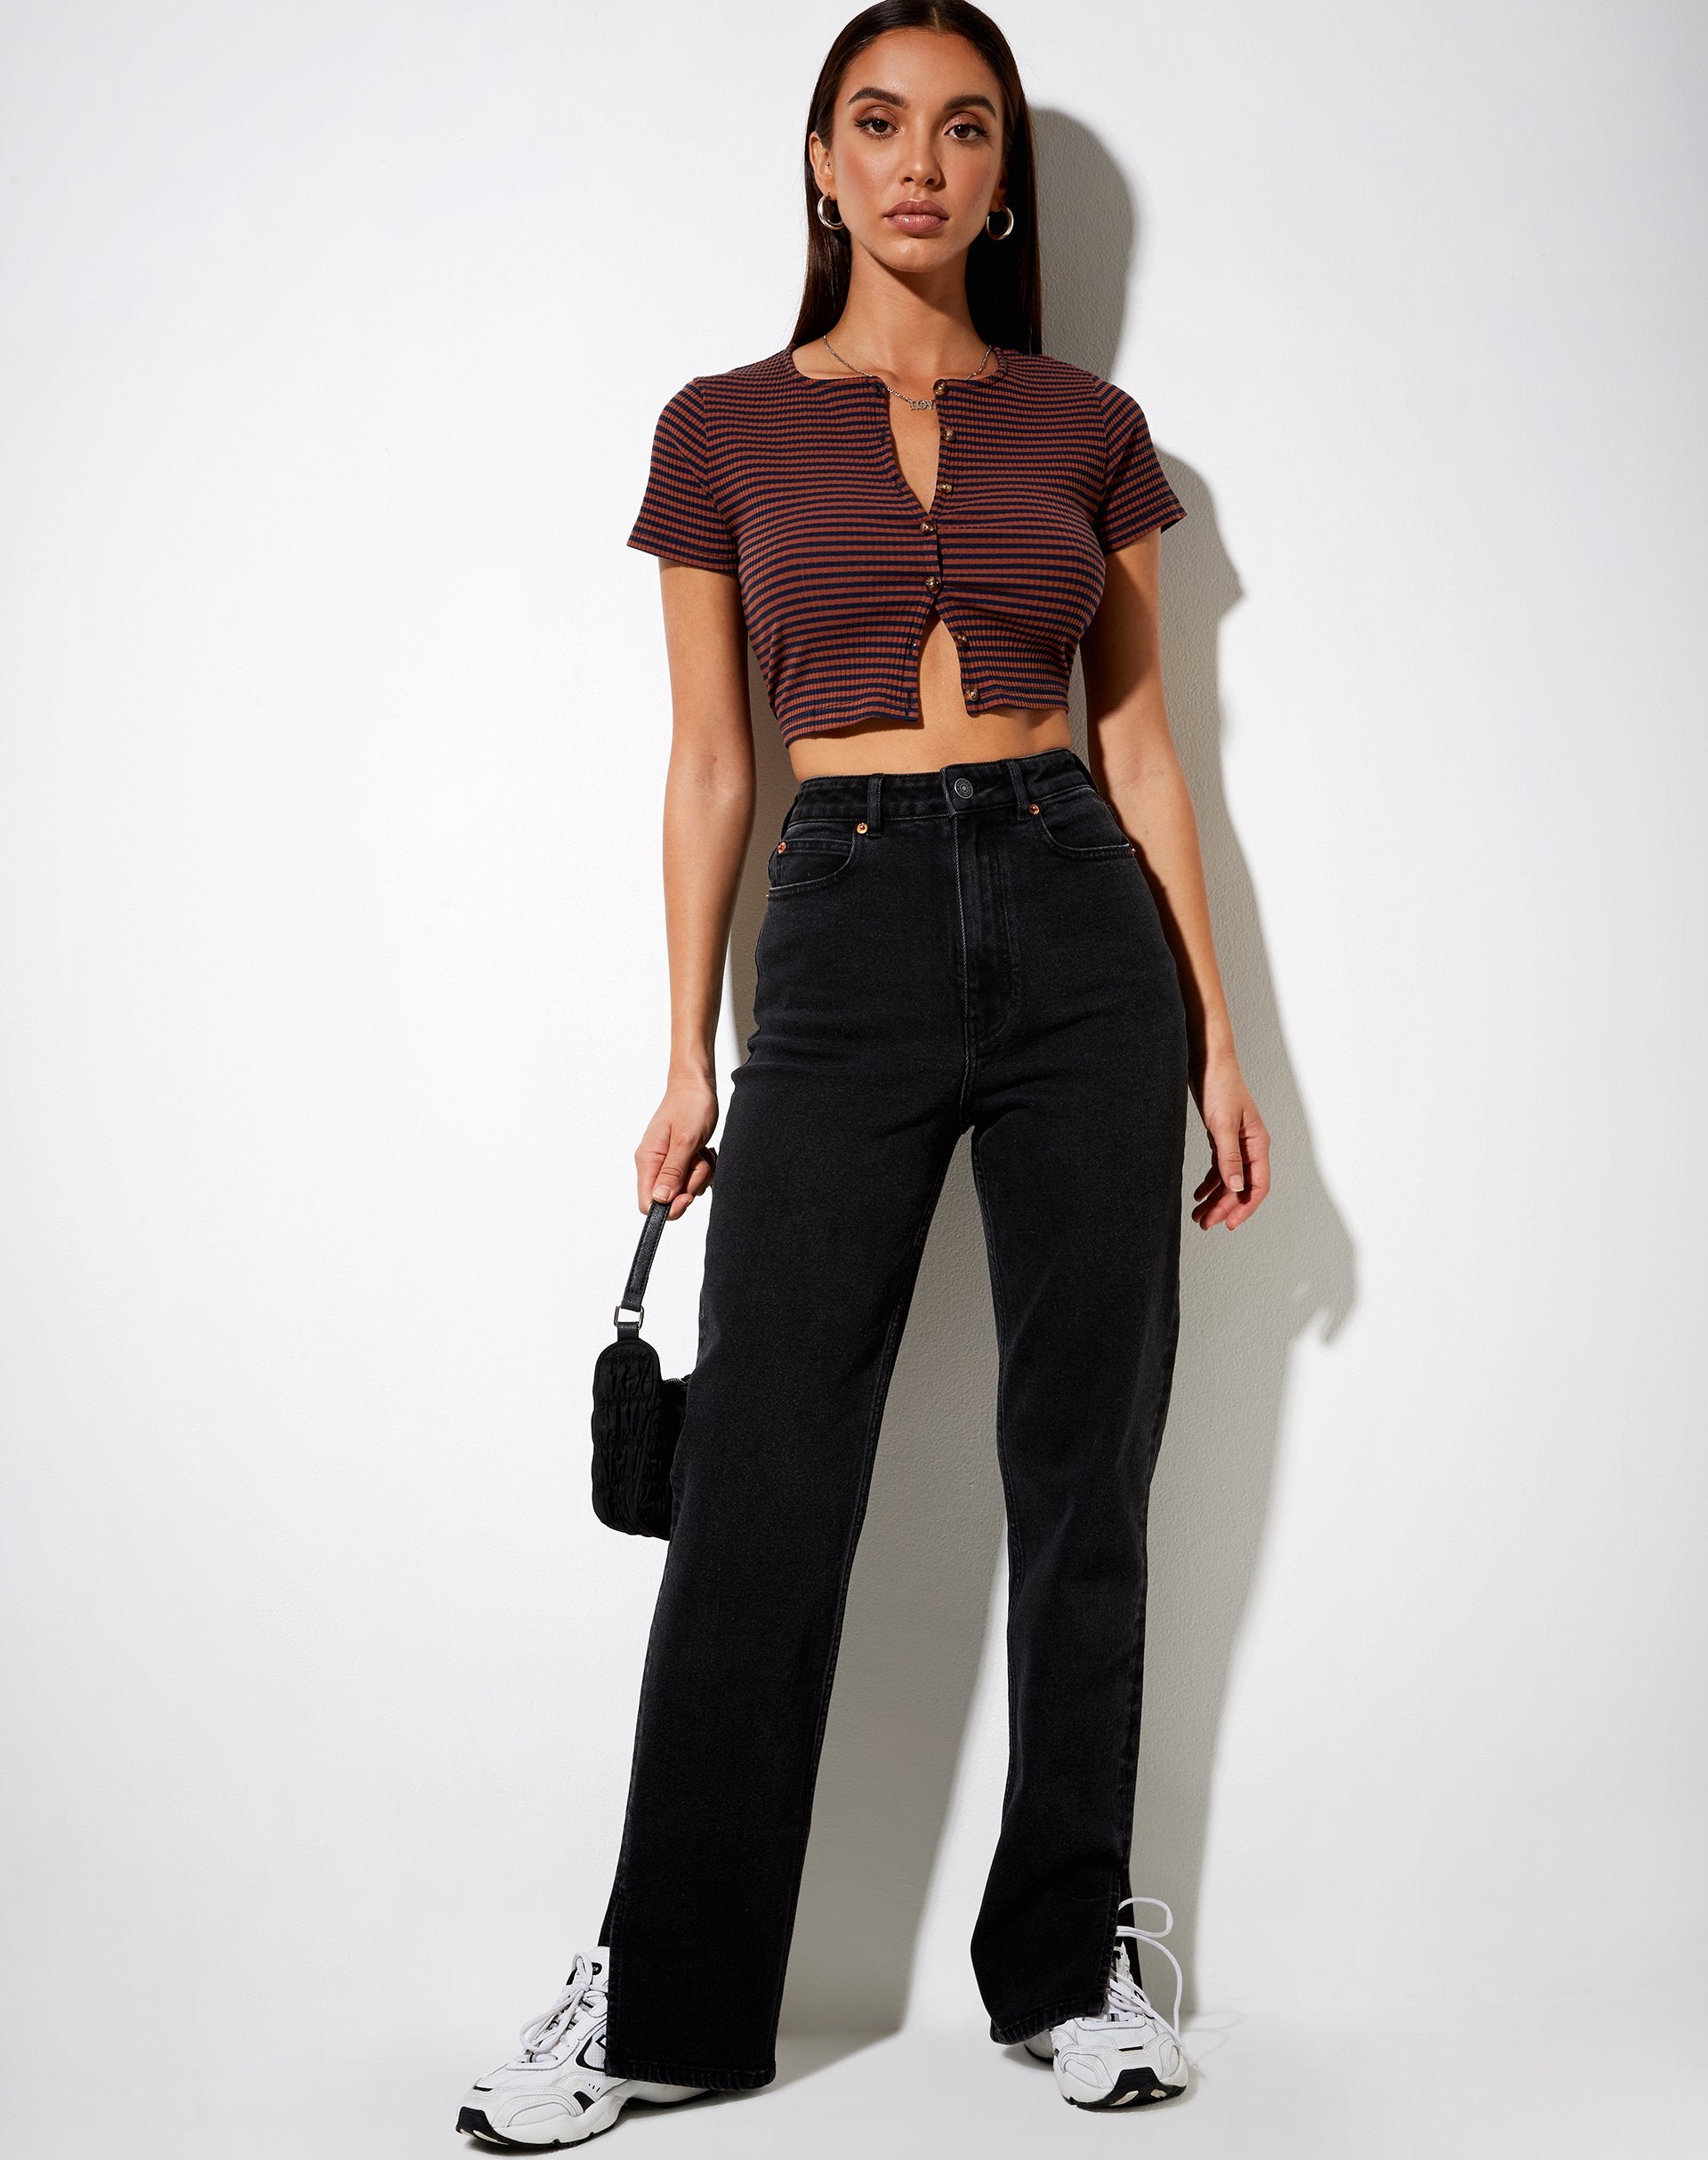 Image of Avia Crop Top in Rib Brown and Navy